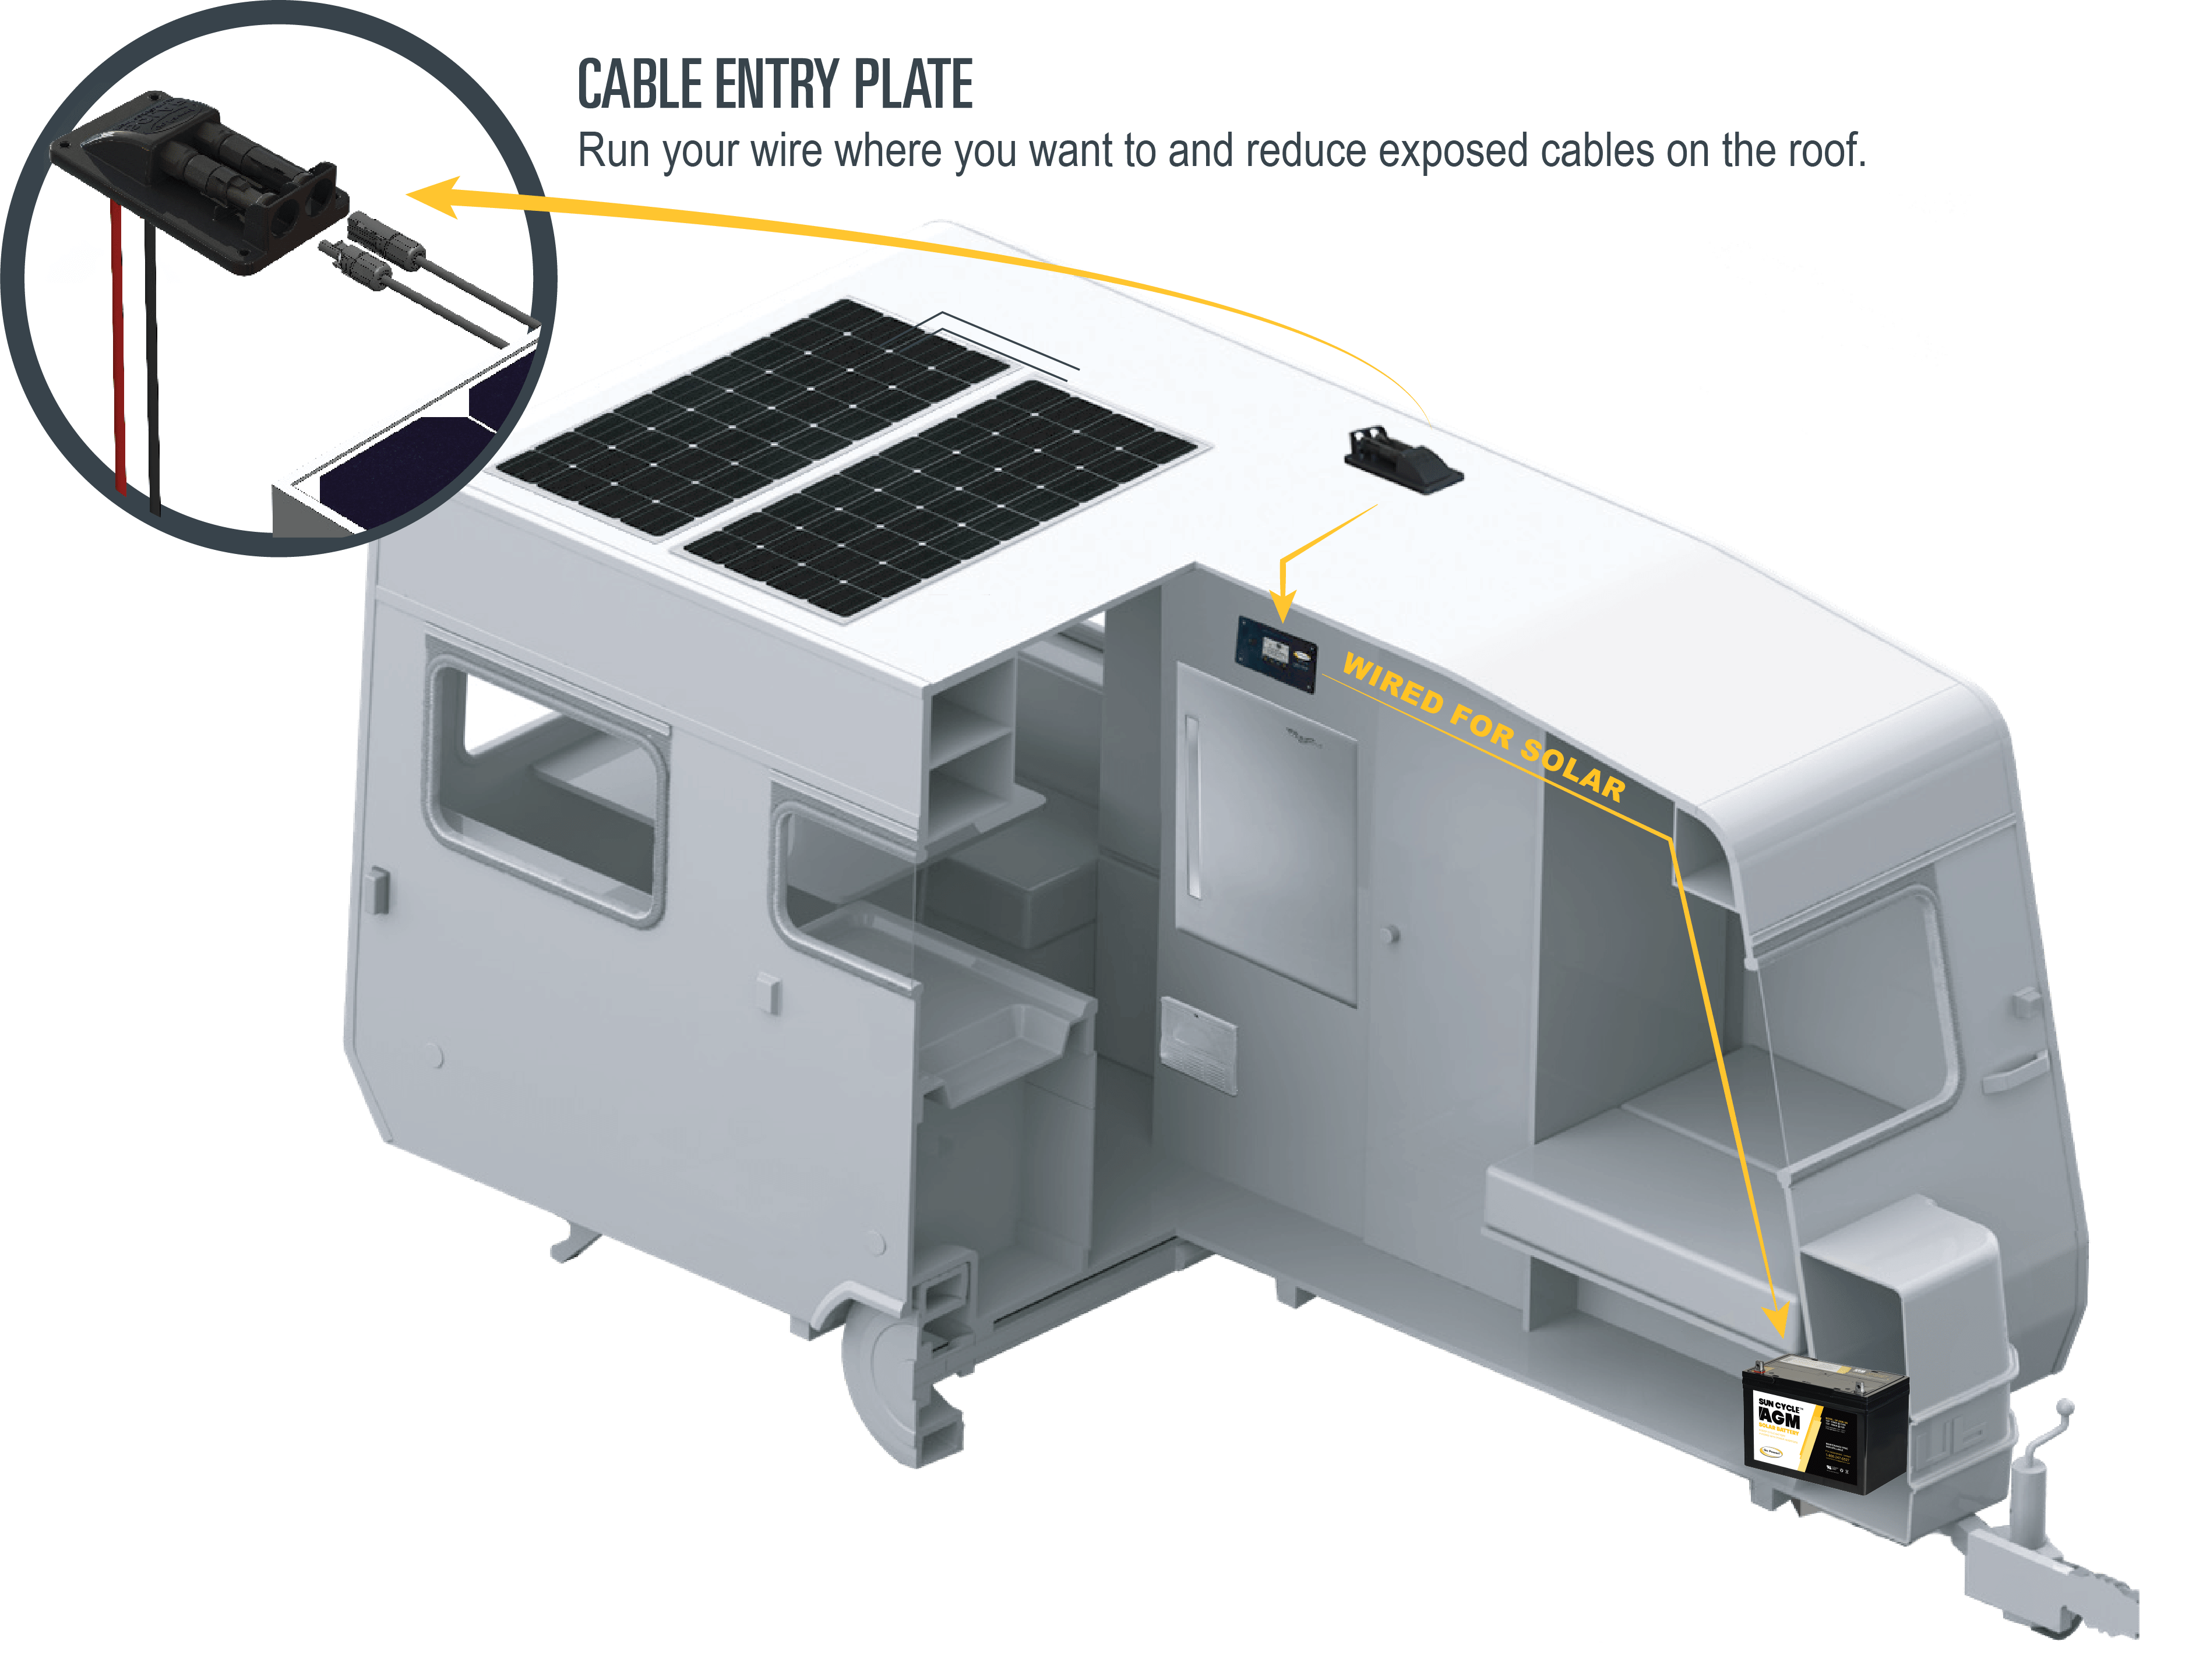 Wired for Solar RV cutout